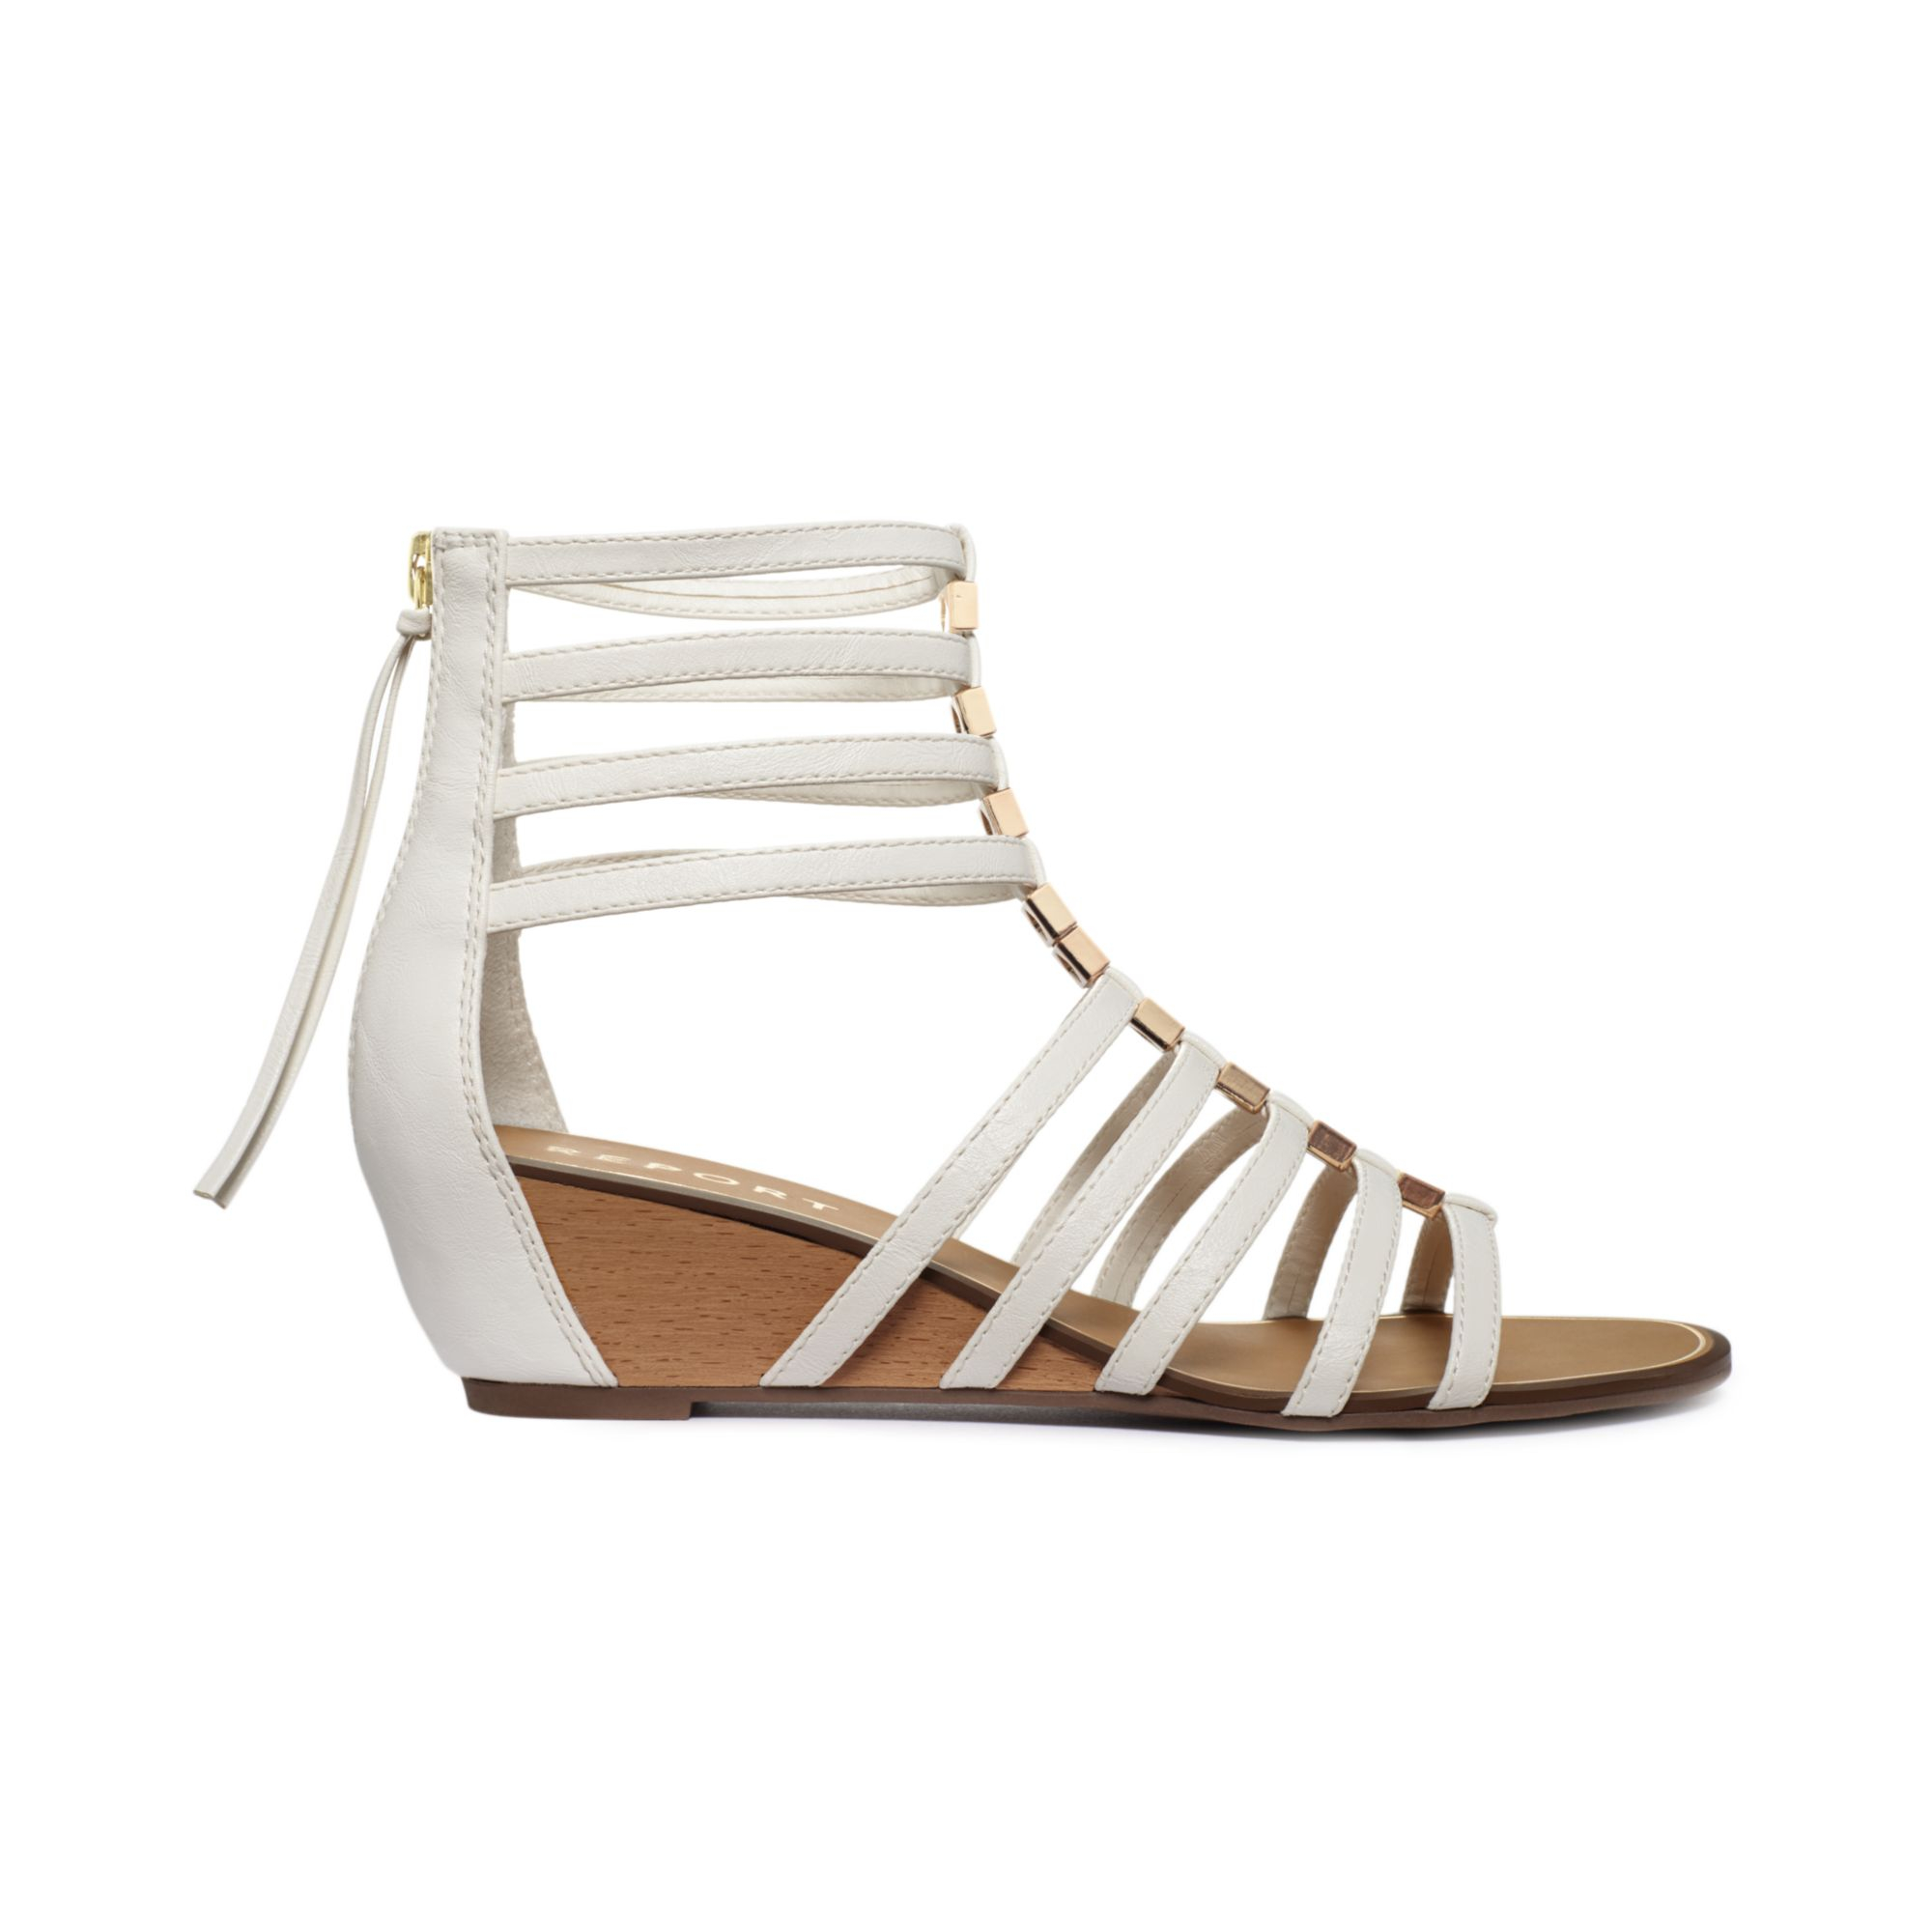 Report Megan Gladiator Wedge Sandals in White | Lyst